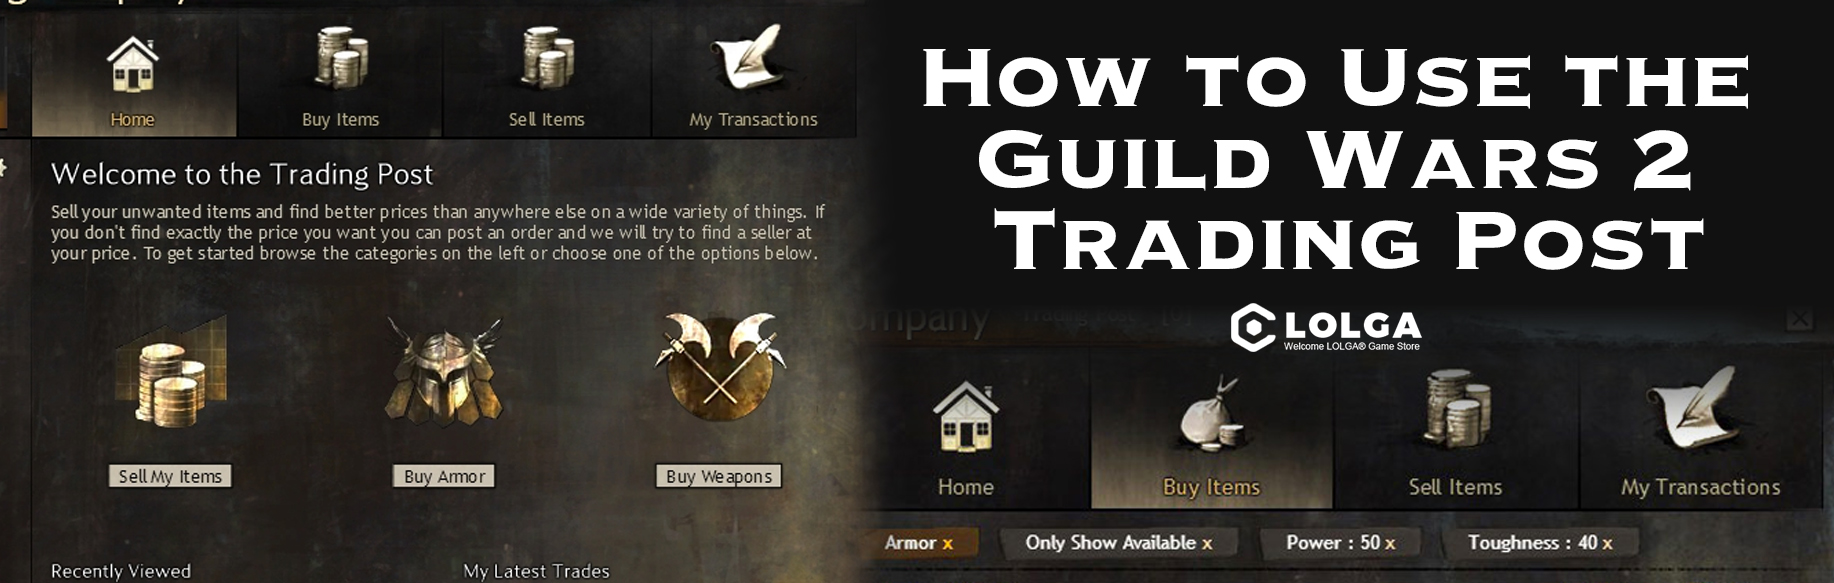 How to Use the Guild Wars 2 Trading Post 